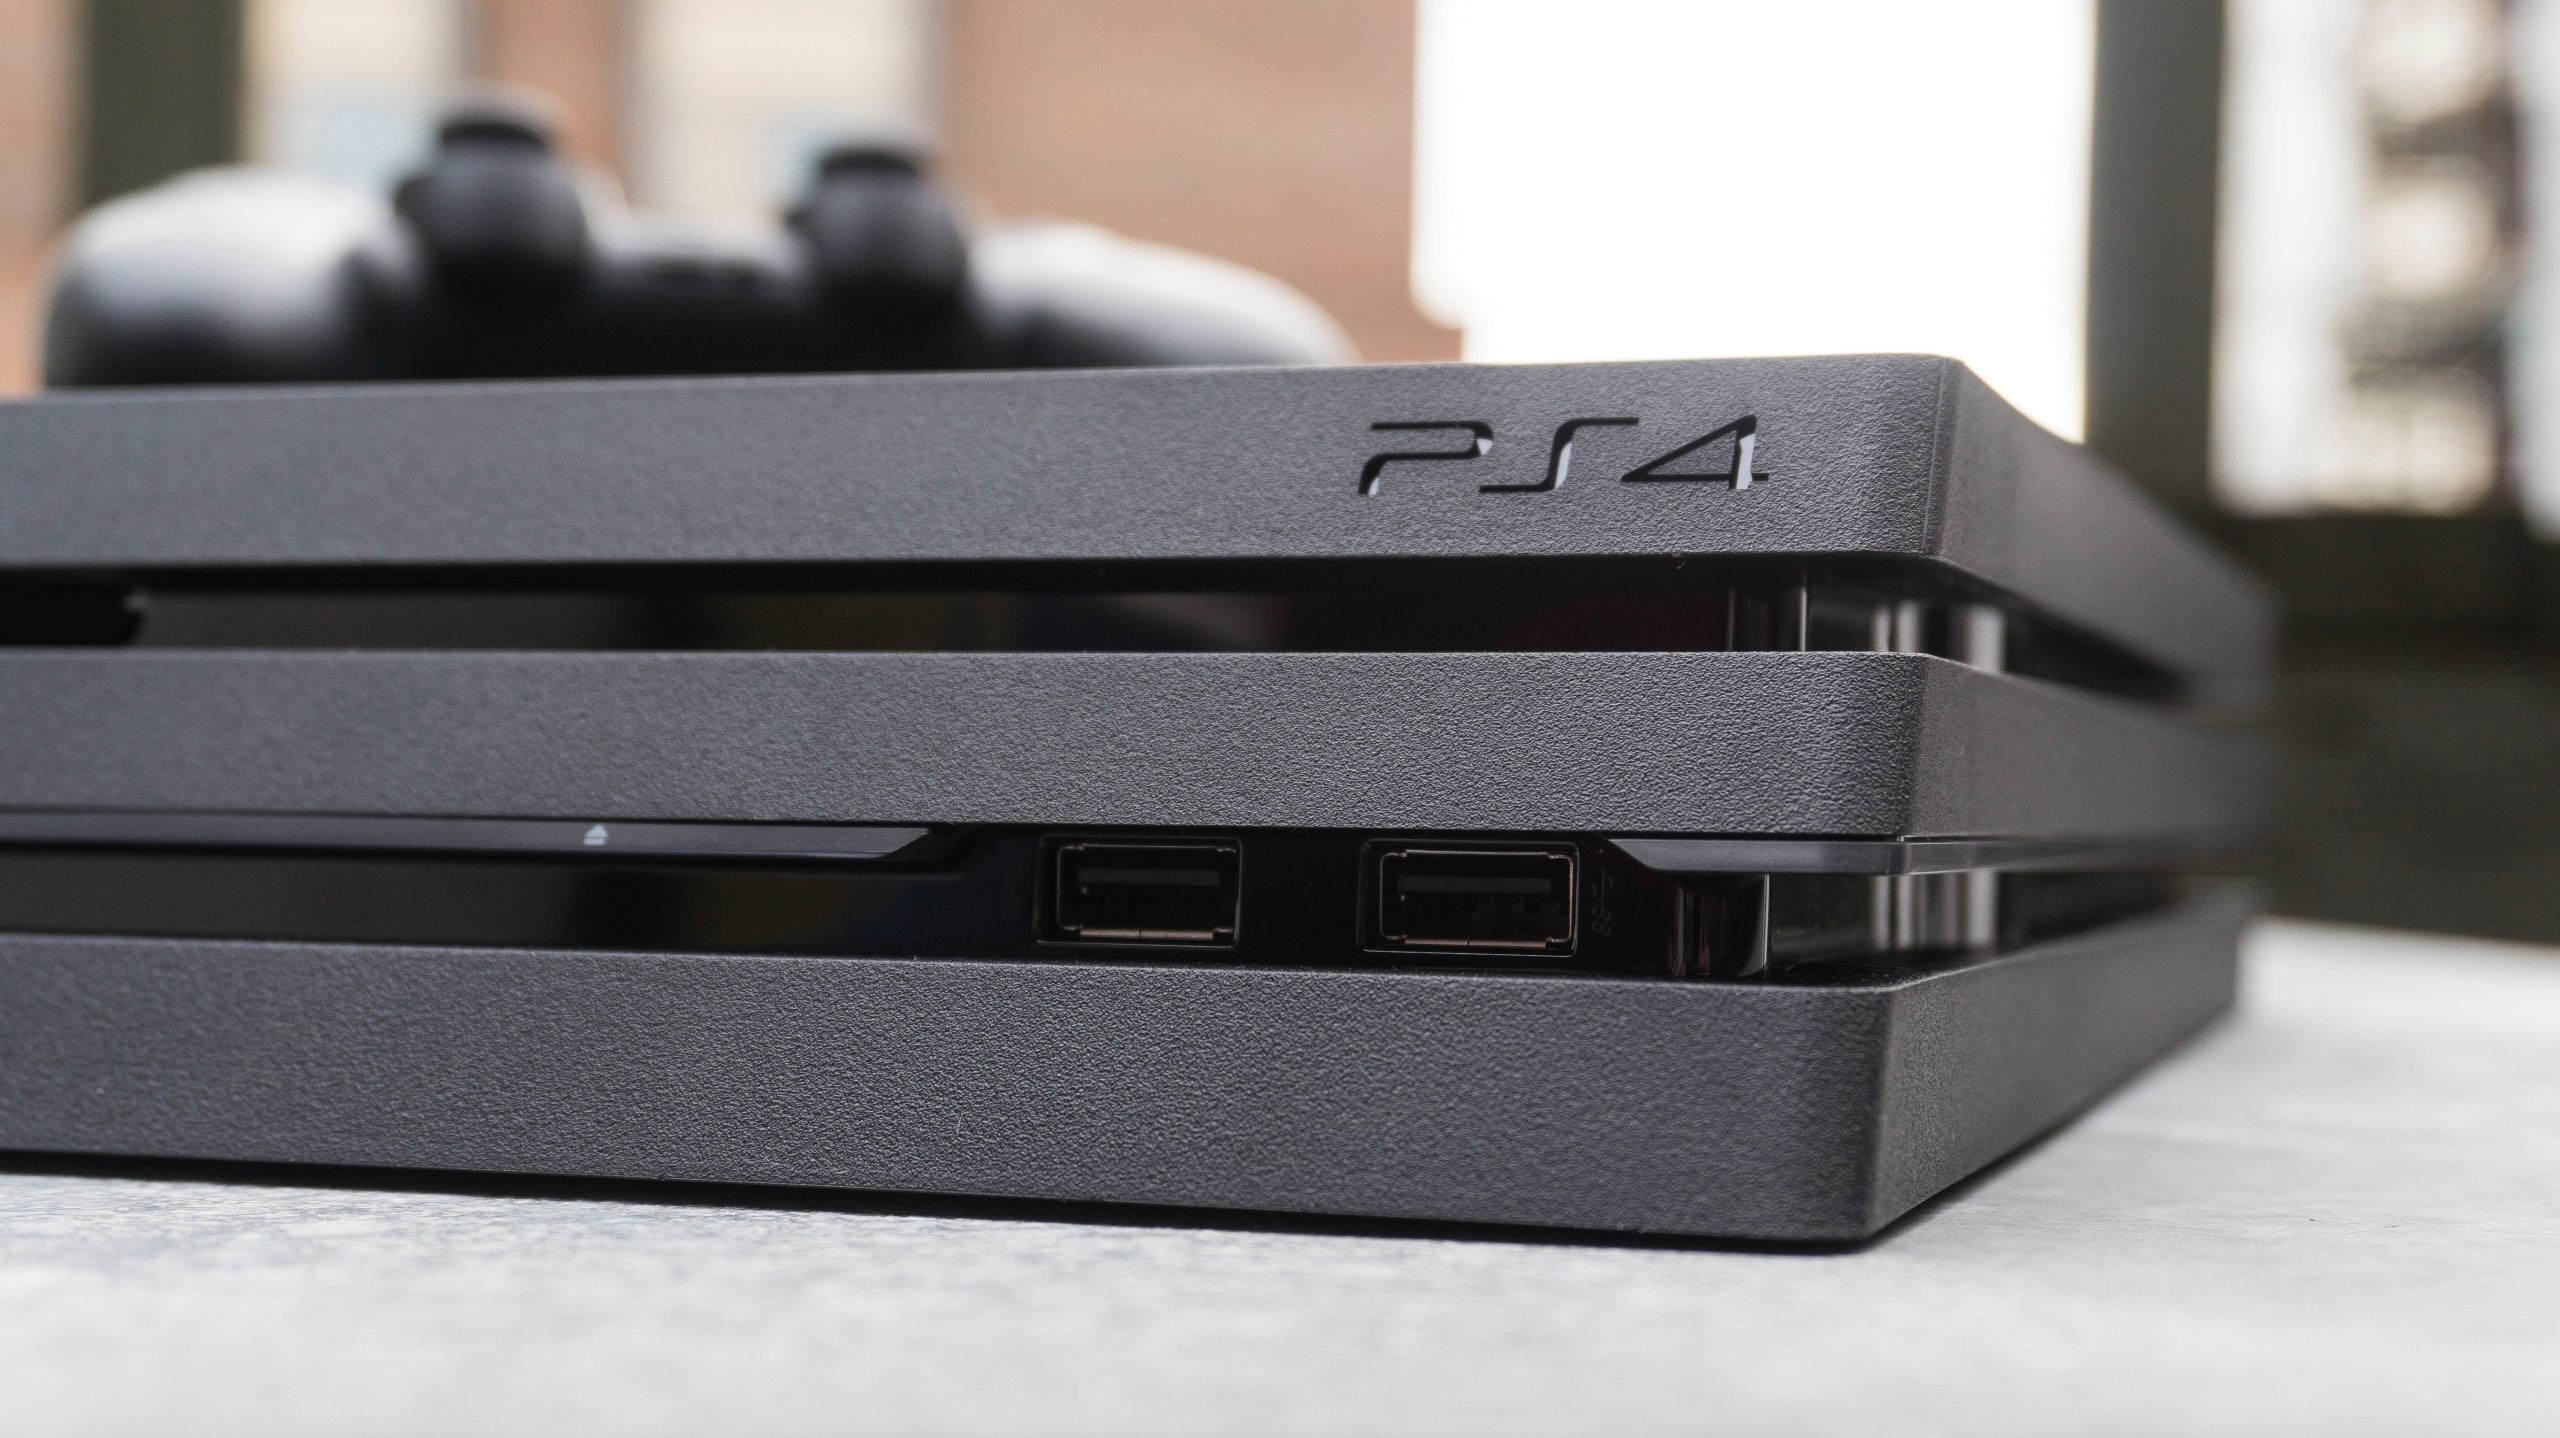 PS4 Pro vs PS4: Whatâs the difference?